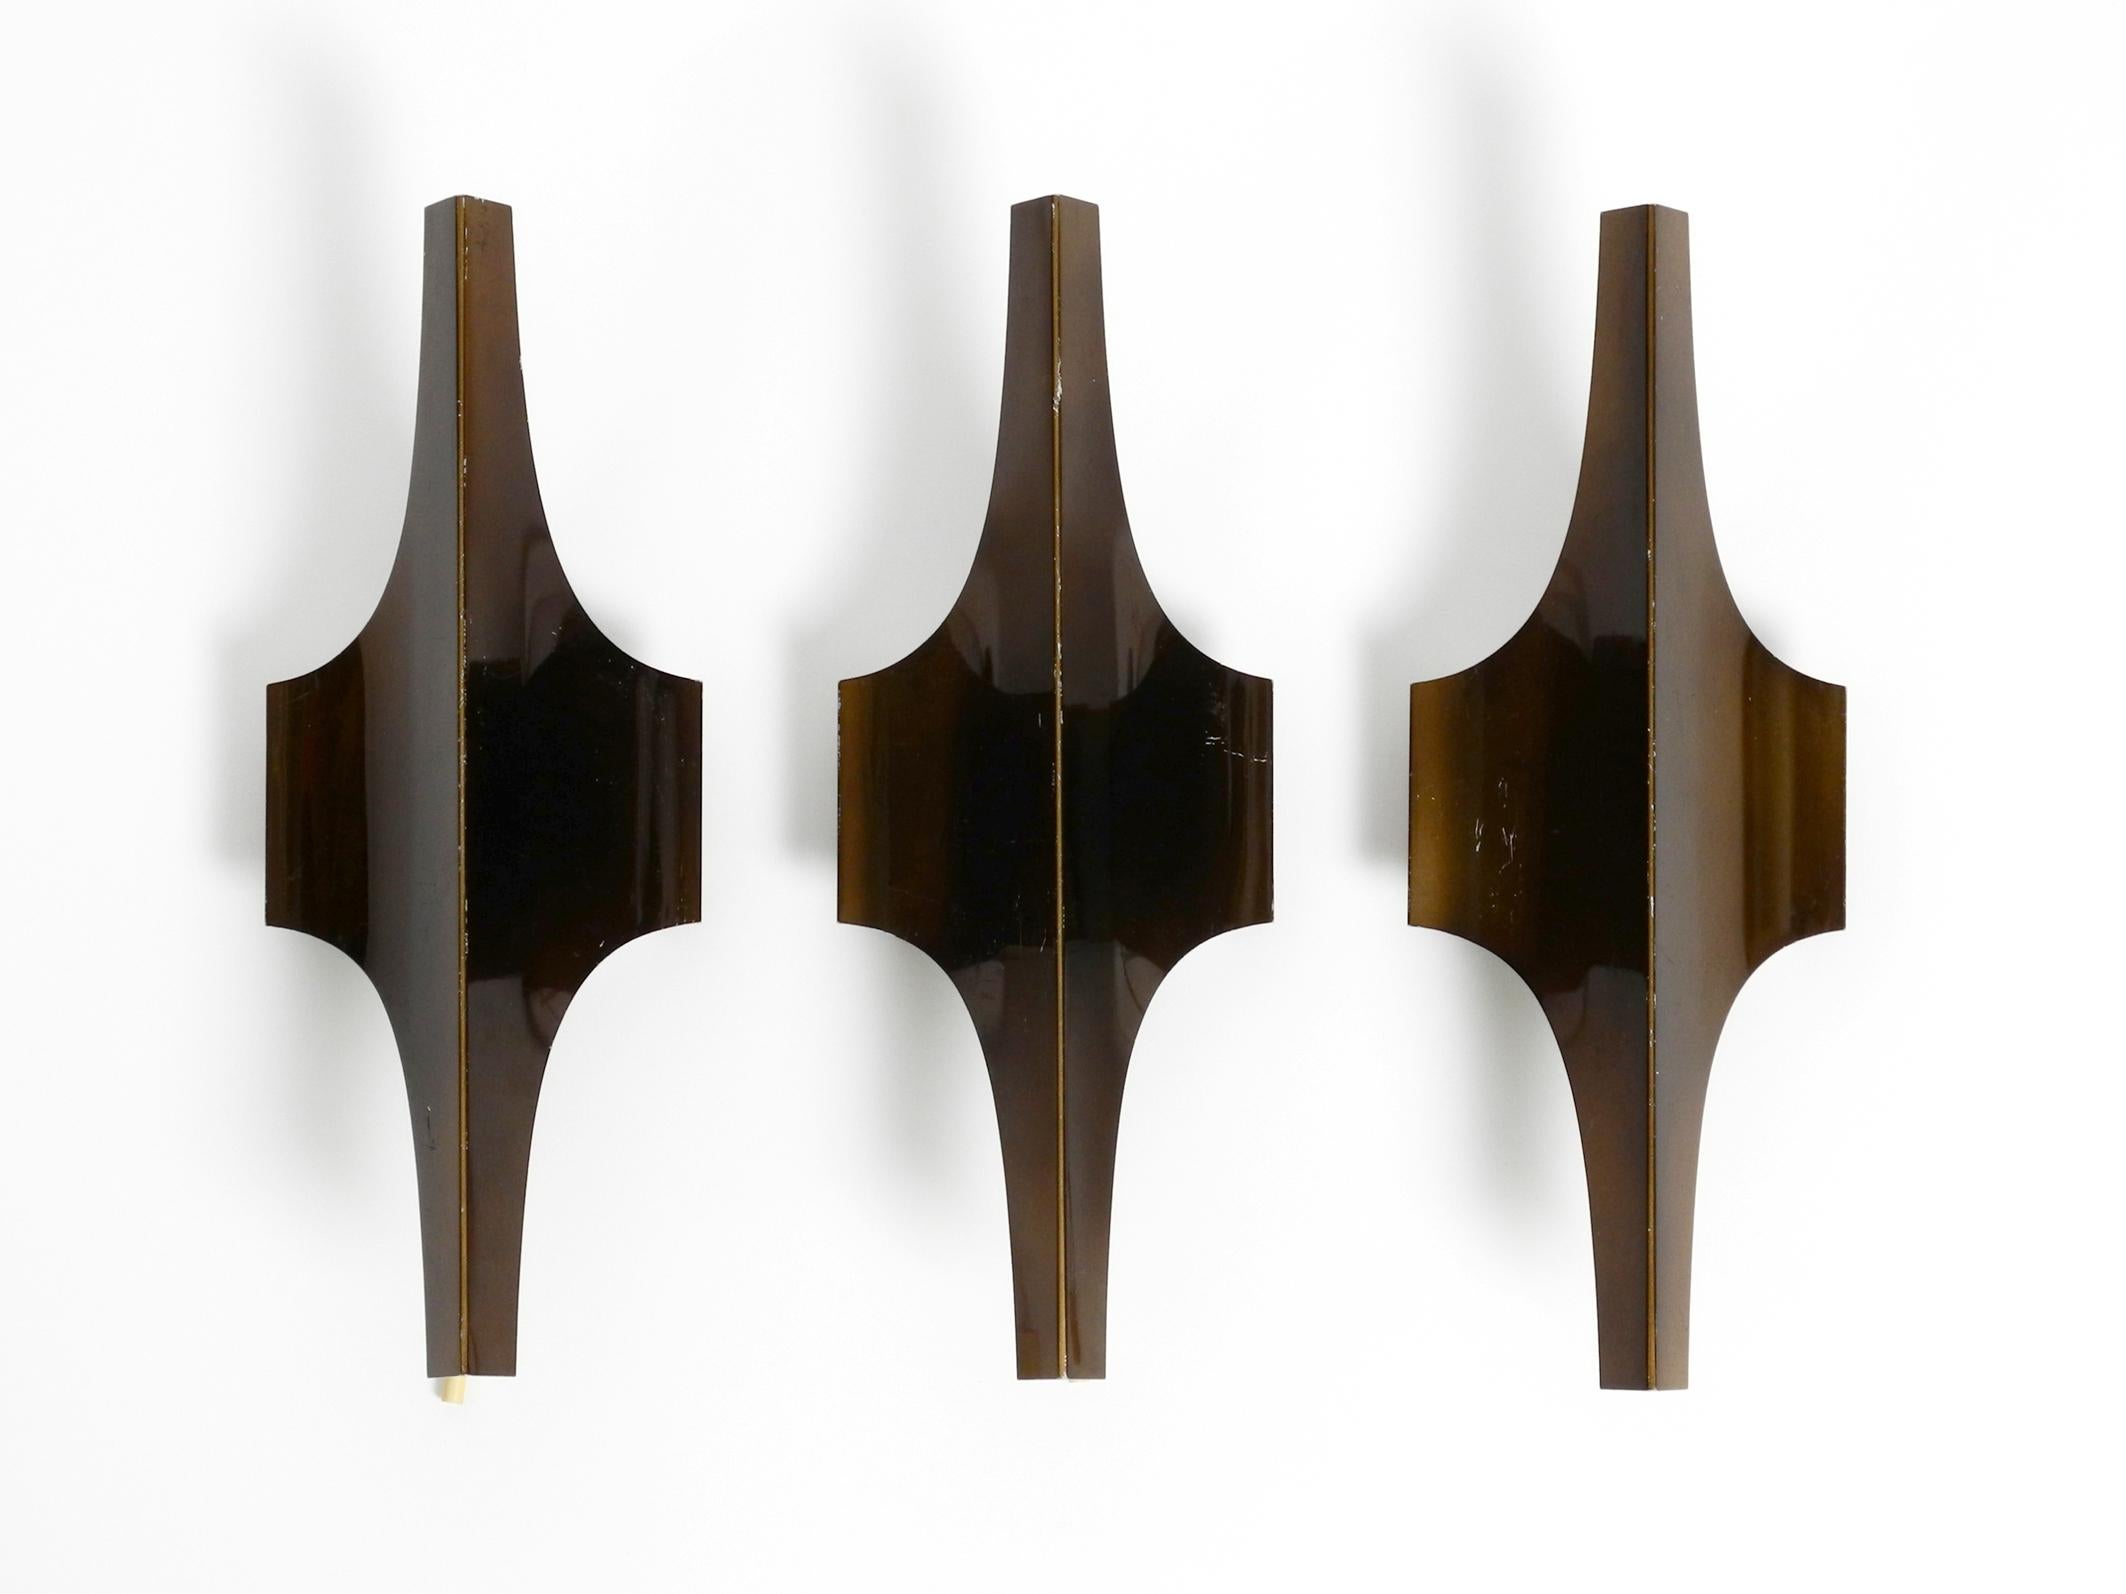 Three Space Age design wall lamps in metal anodised in bronze colour.
Design by Wilhelm Braun-Feldweg for Doria. Made in Germany.
Very special 1960s German design.
Great futuristic shape, typical for that time.
In good vintage condition with a